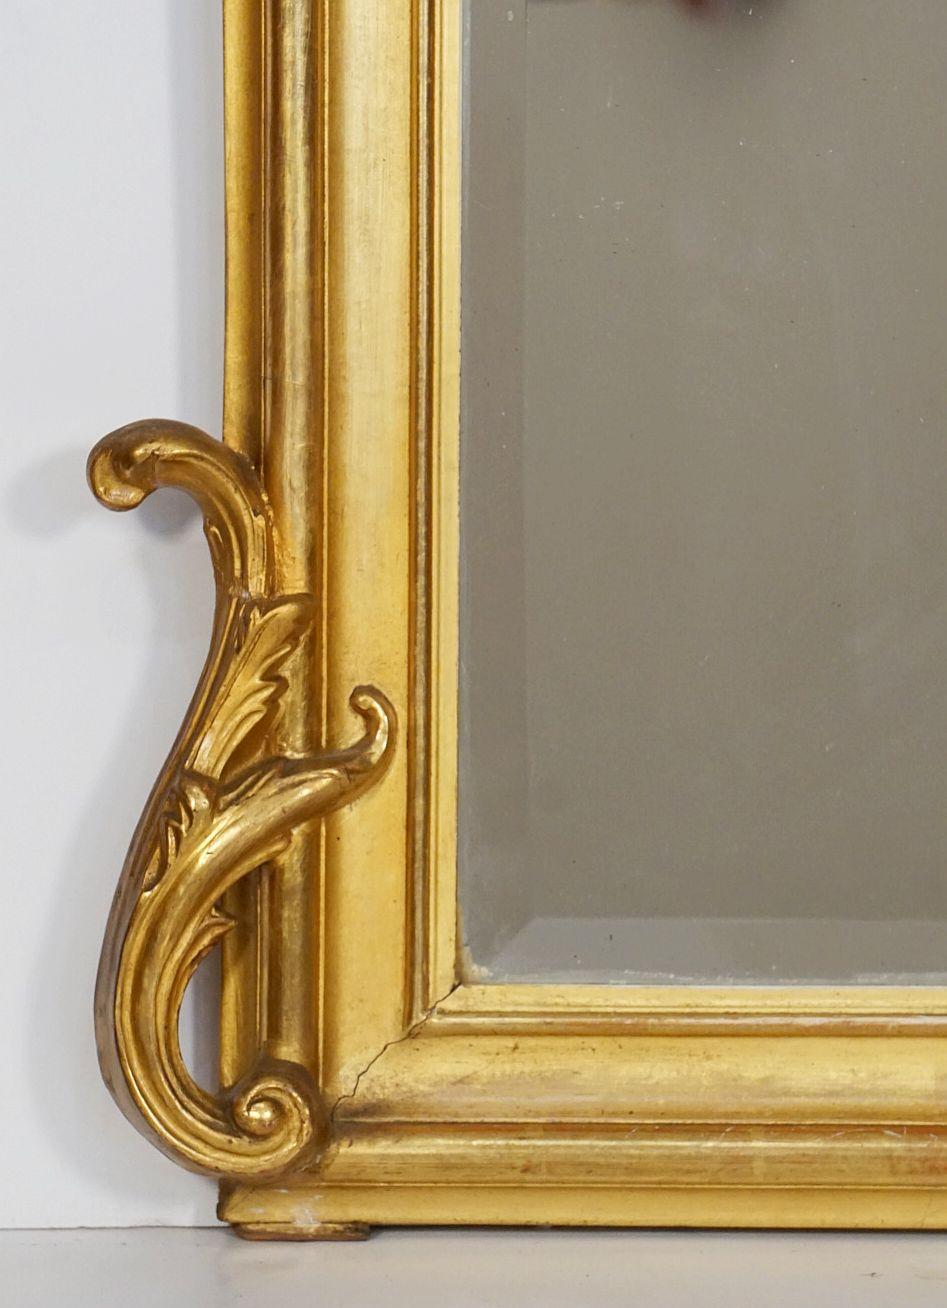 Large French Gilt Pier Mirror from the 19th Century (H 56 x W 37) For Sale 1